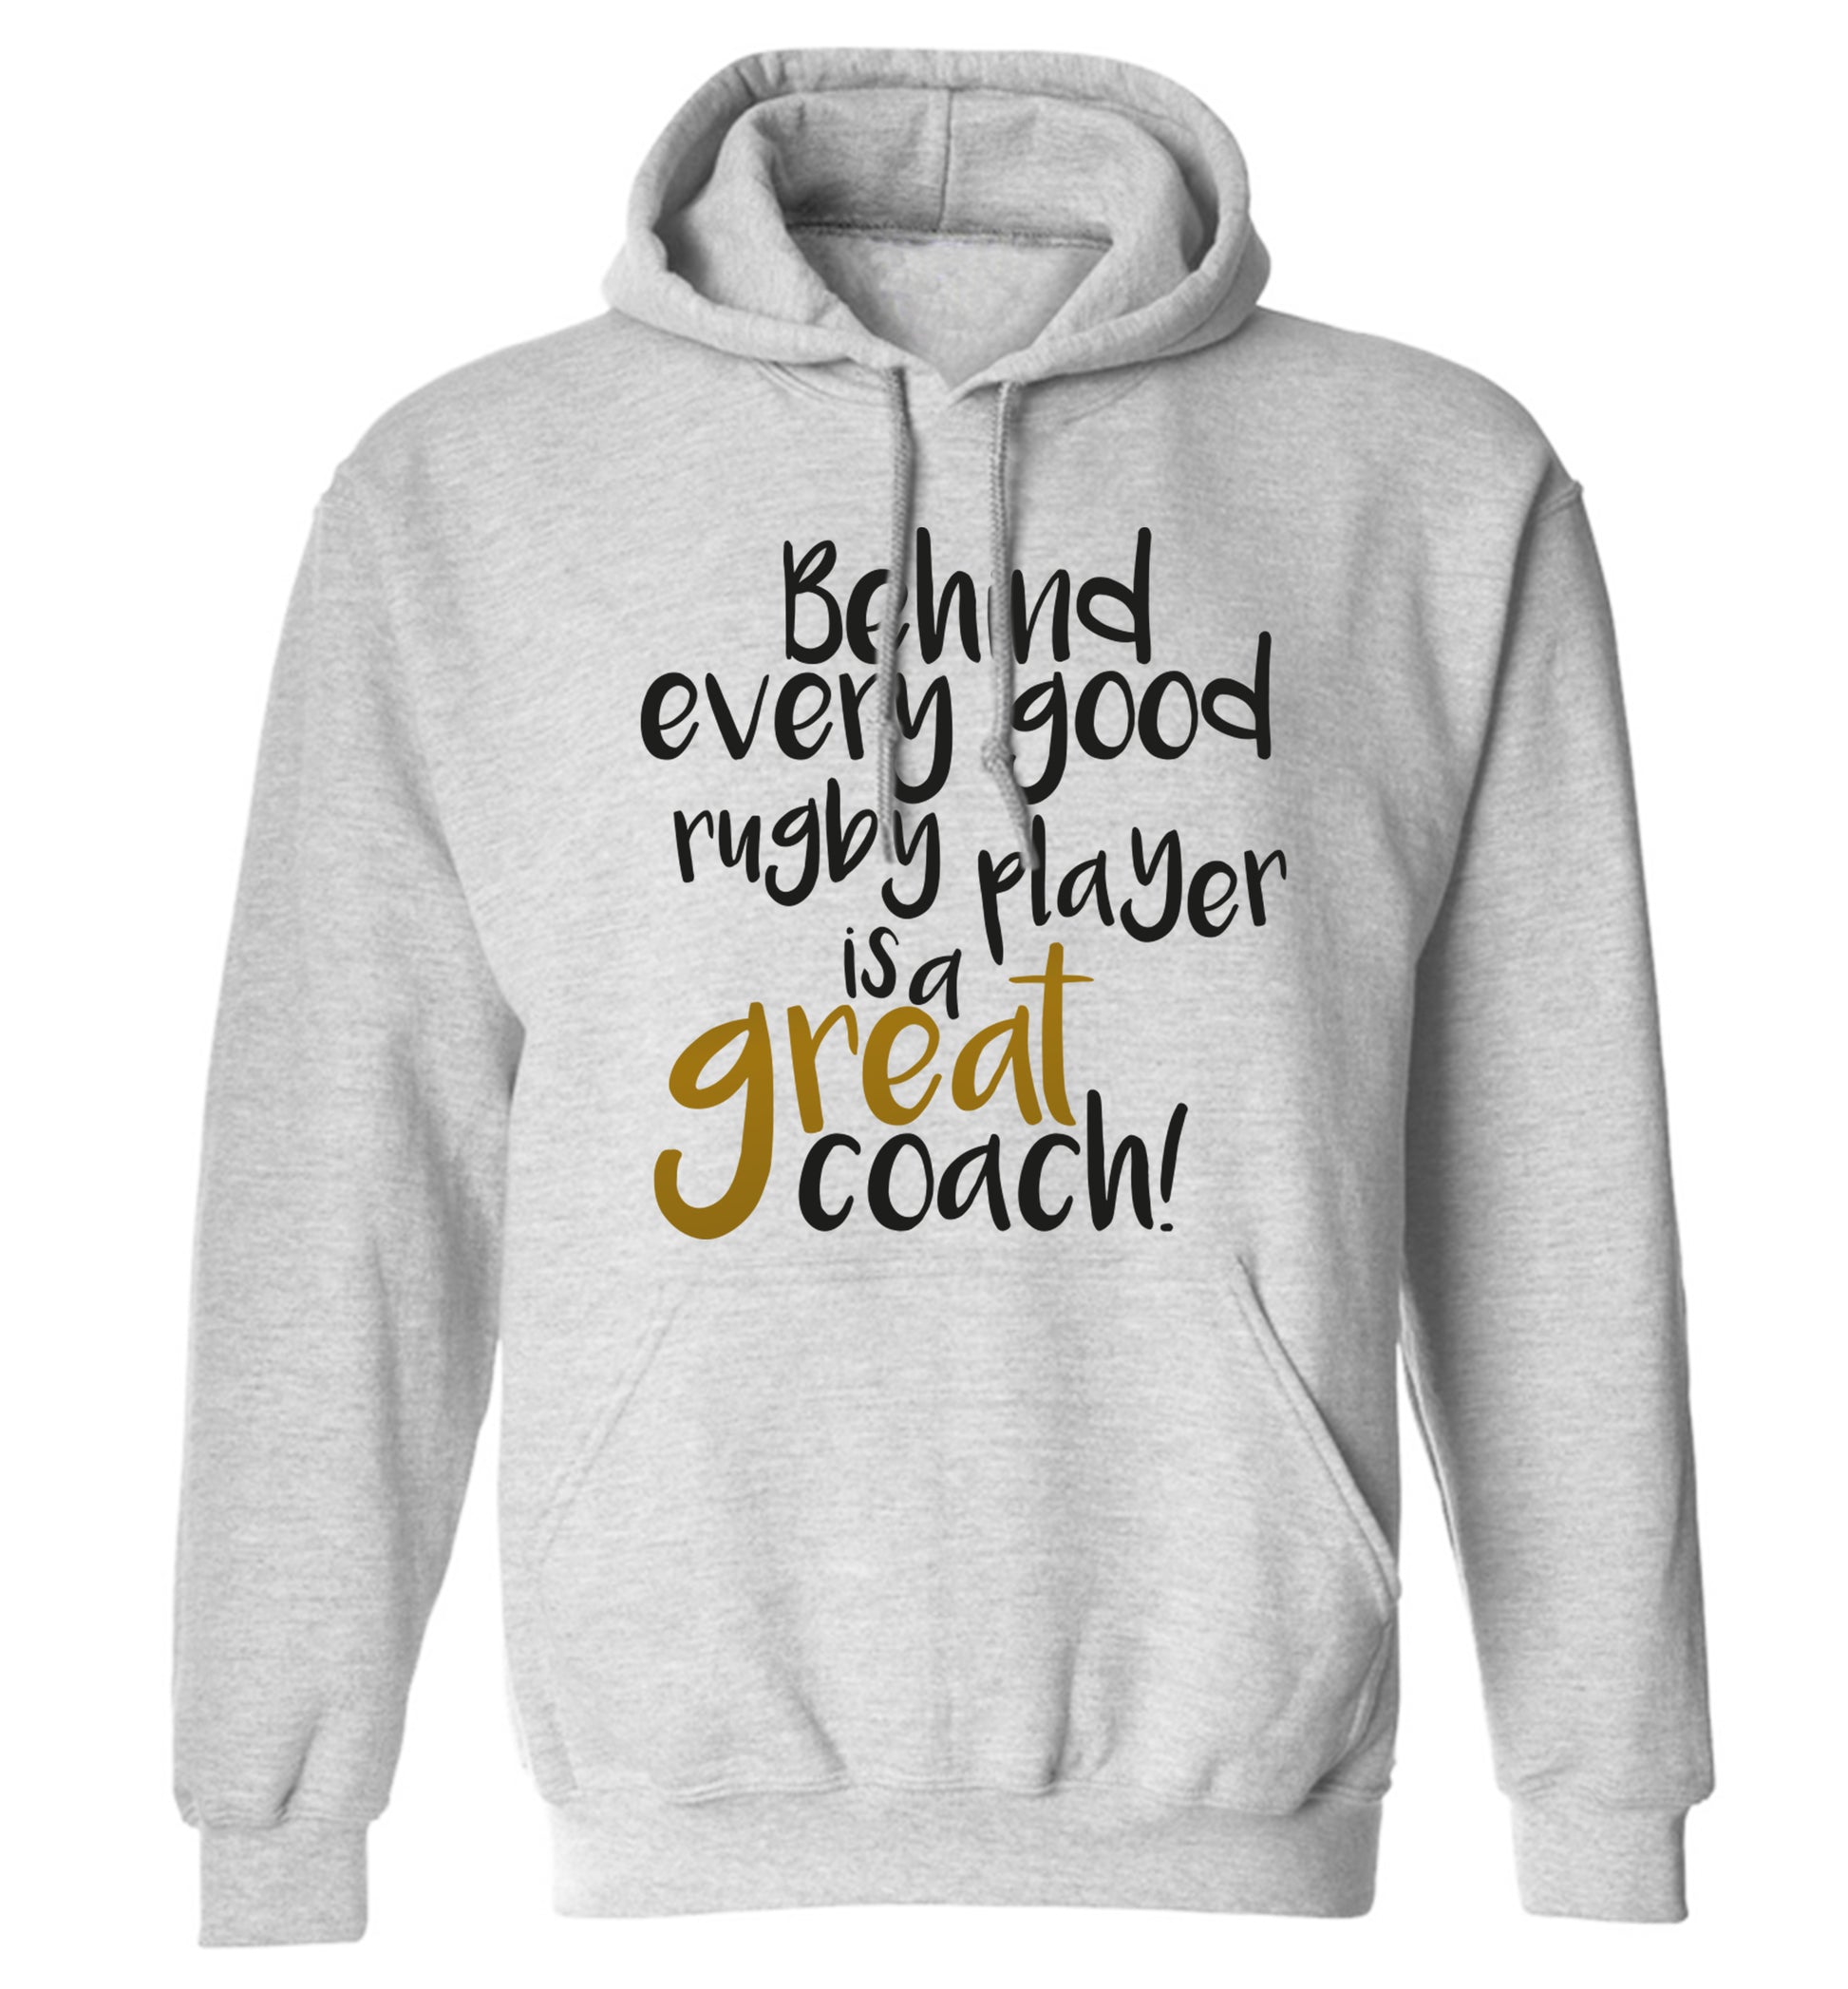 Behind every goor rugby player is a great coach adults unisex grey hoodie 2XL